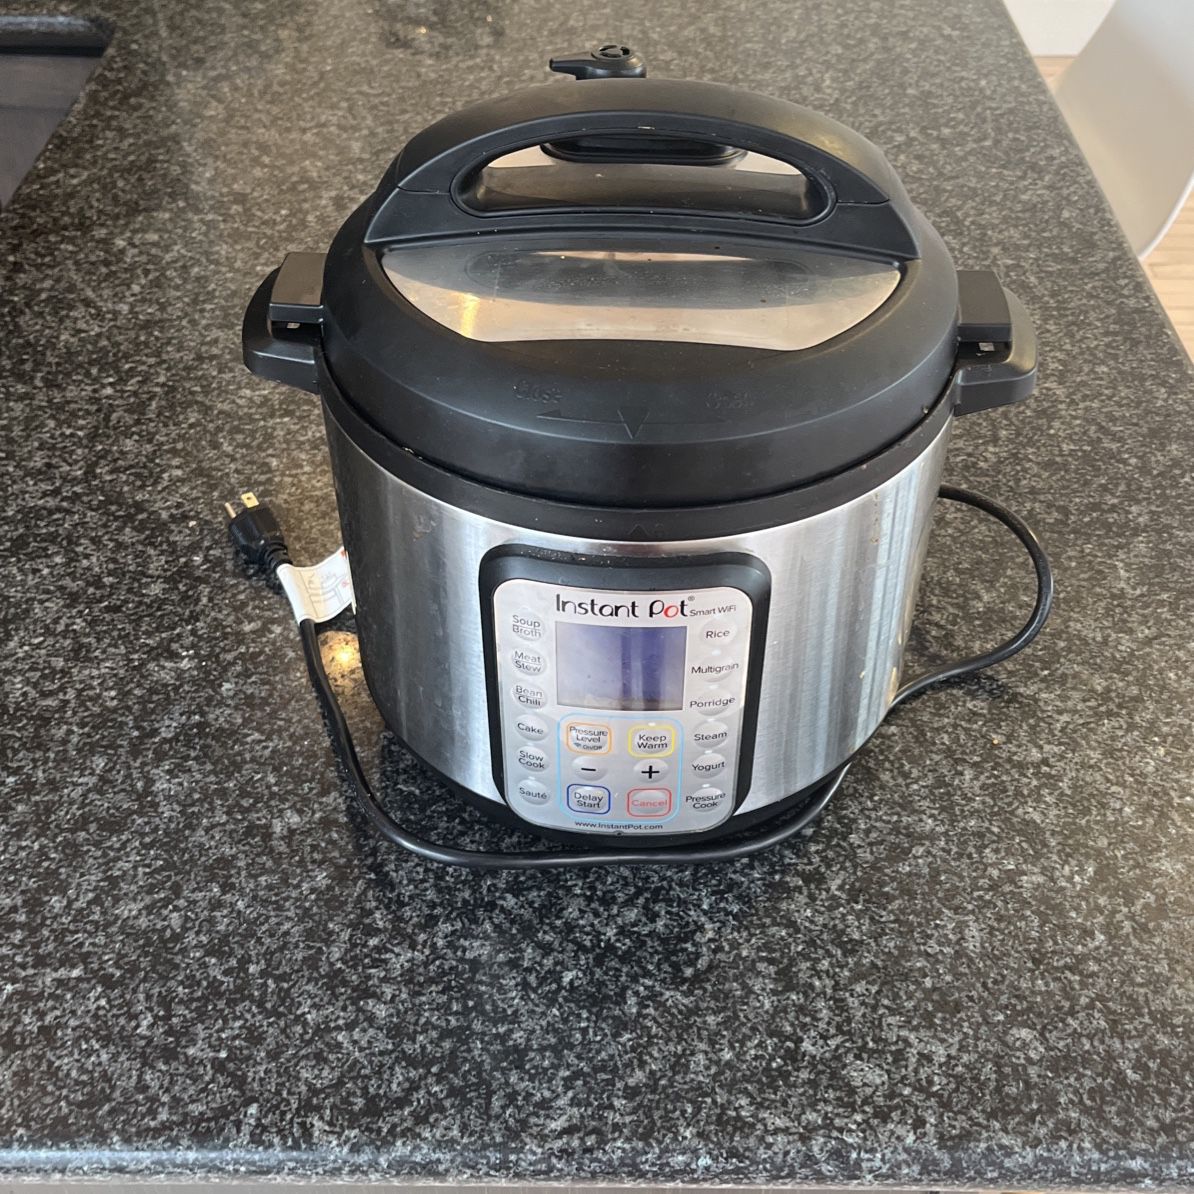 Instant Pot Lux 8 Quart With Accessories for Sale in New York, NY - OfferUp